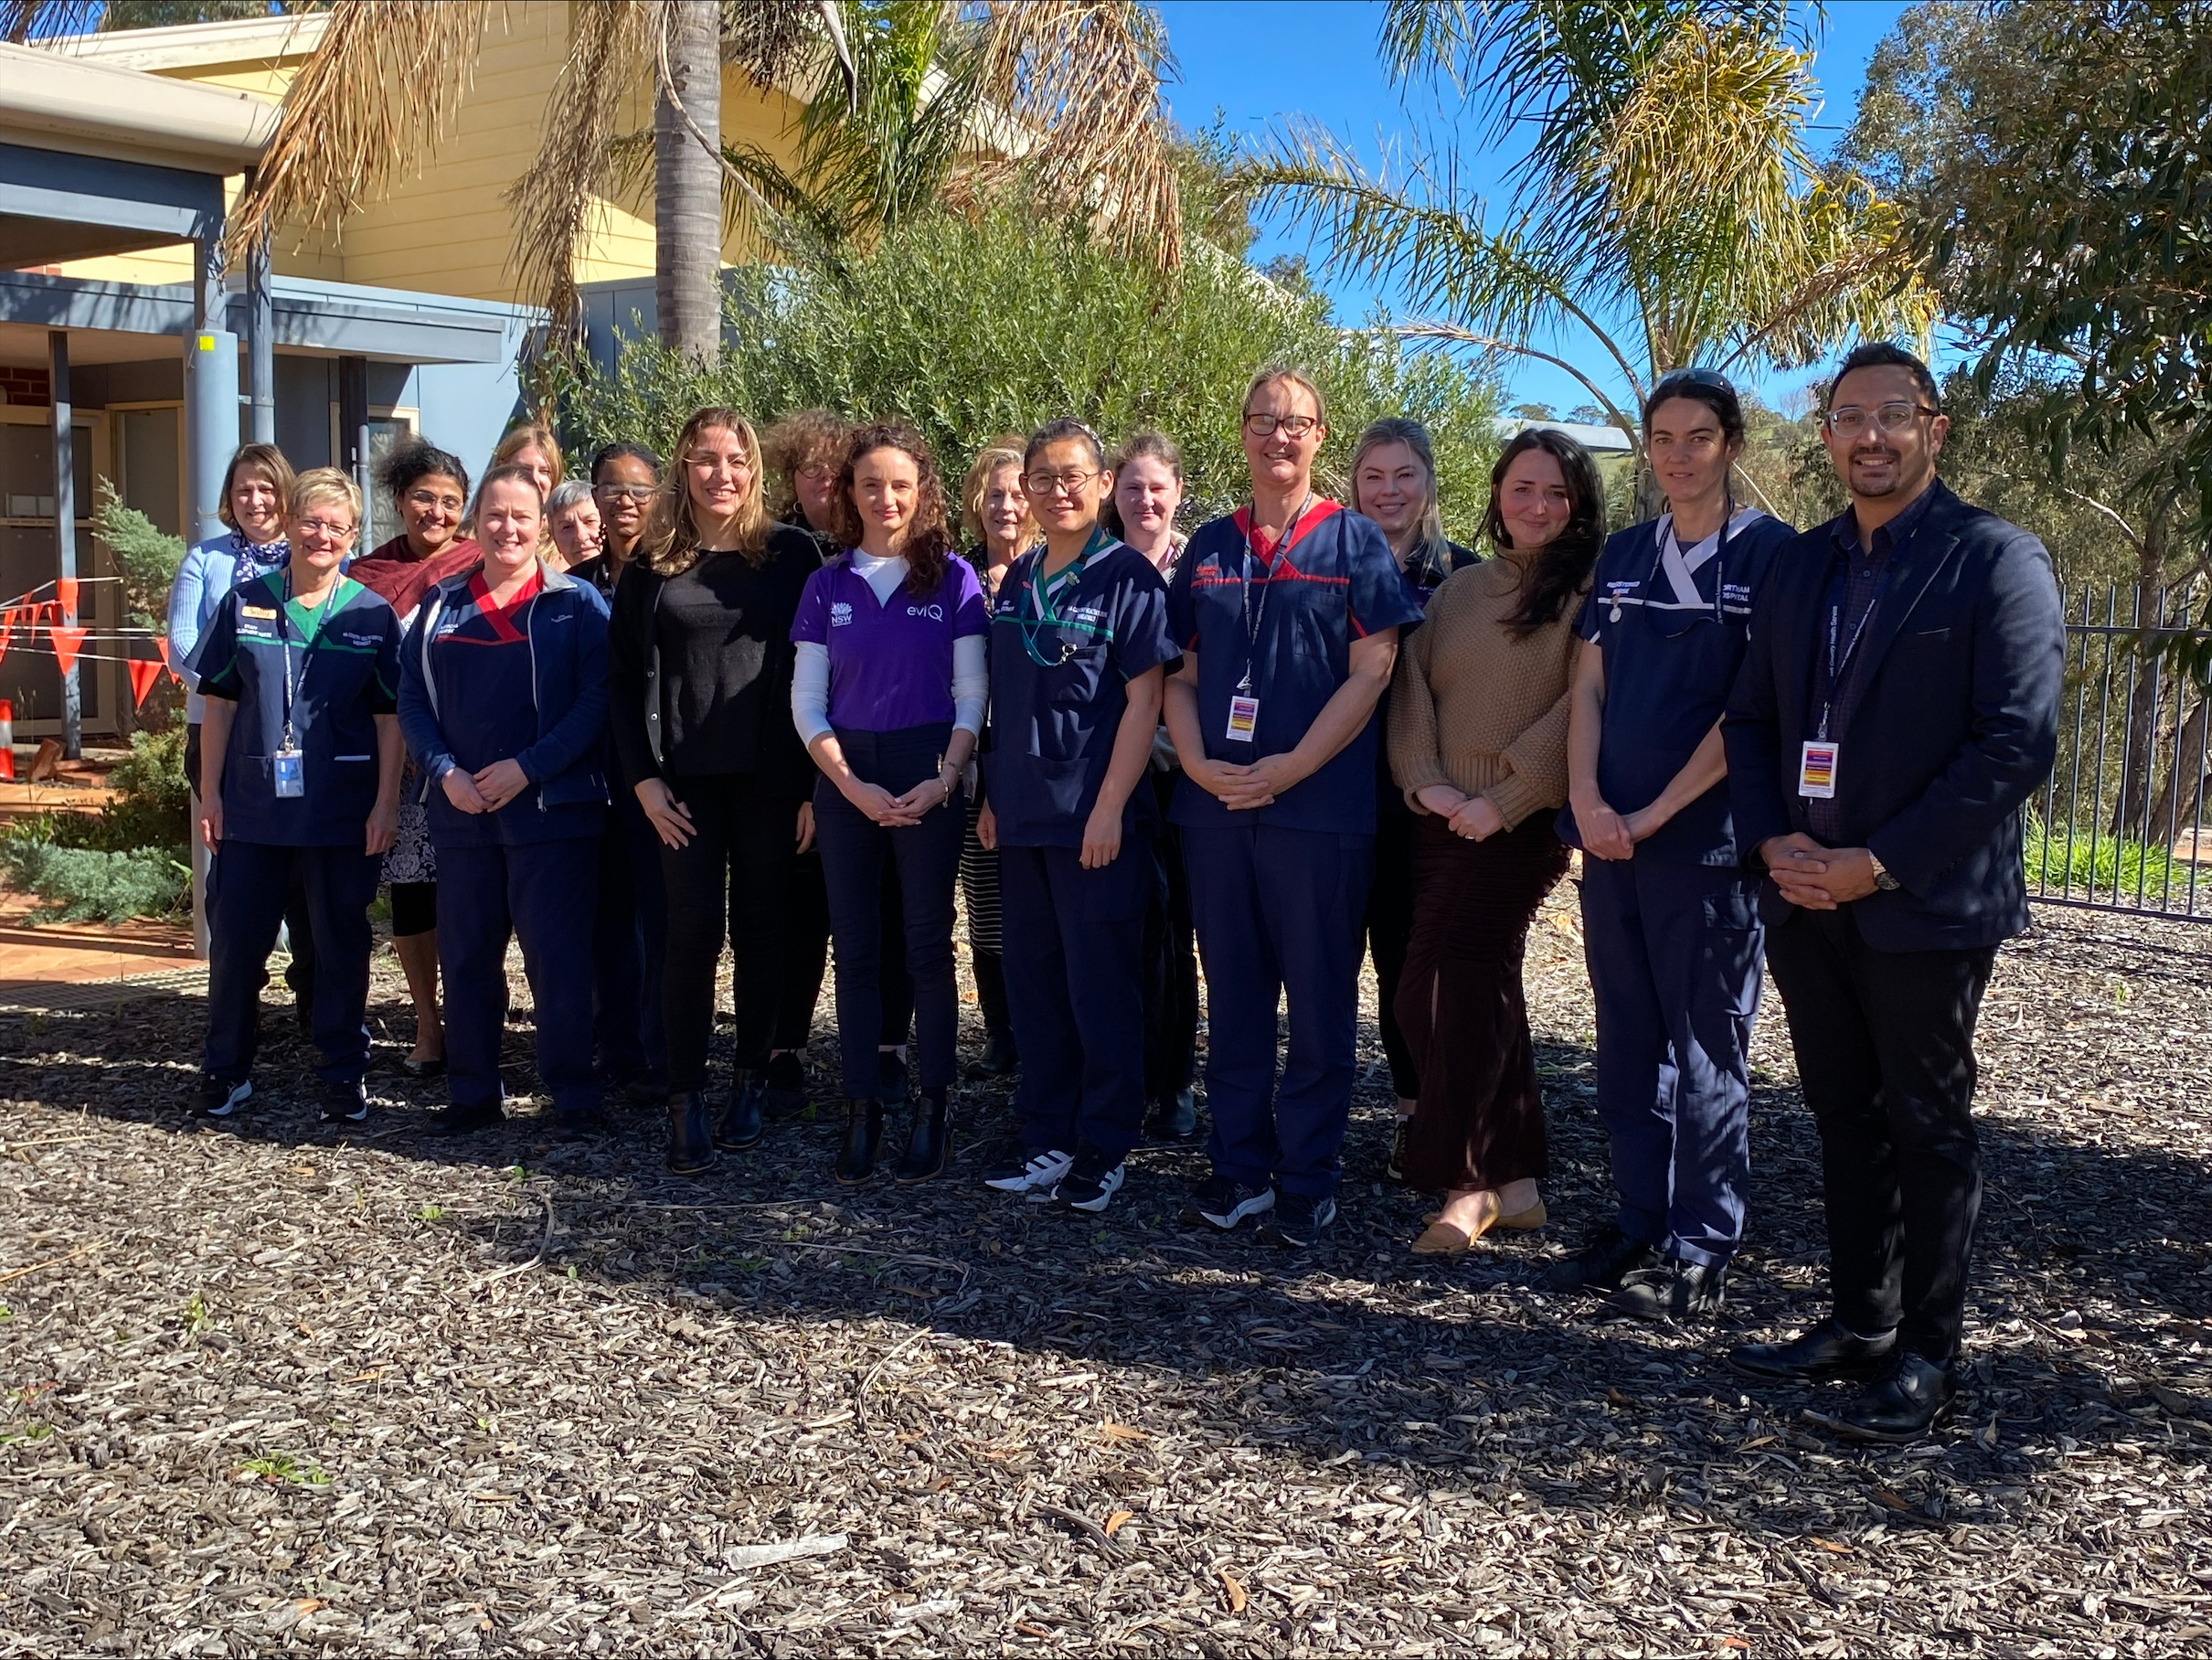 A group of nurses and clinical staff stand outside in a large group smiling